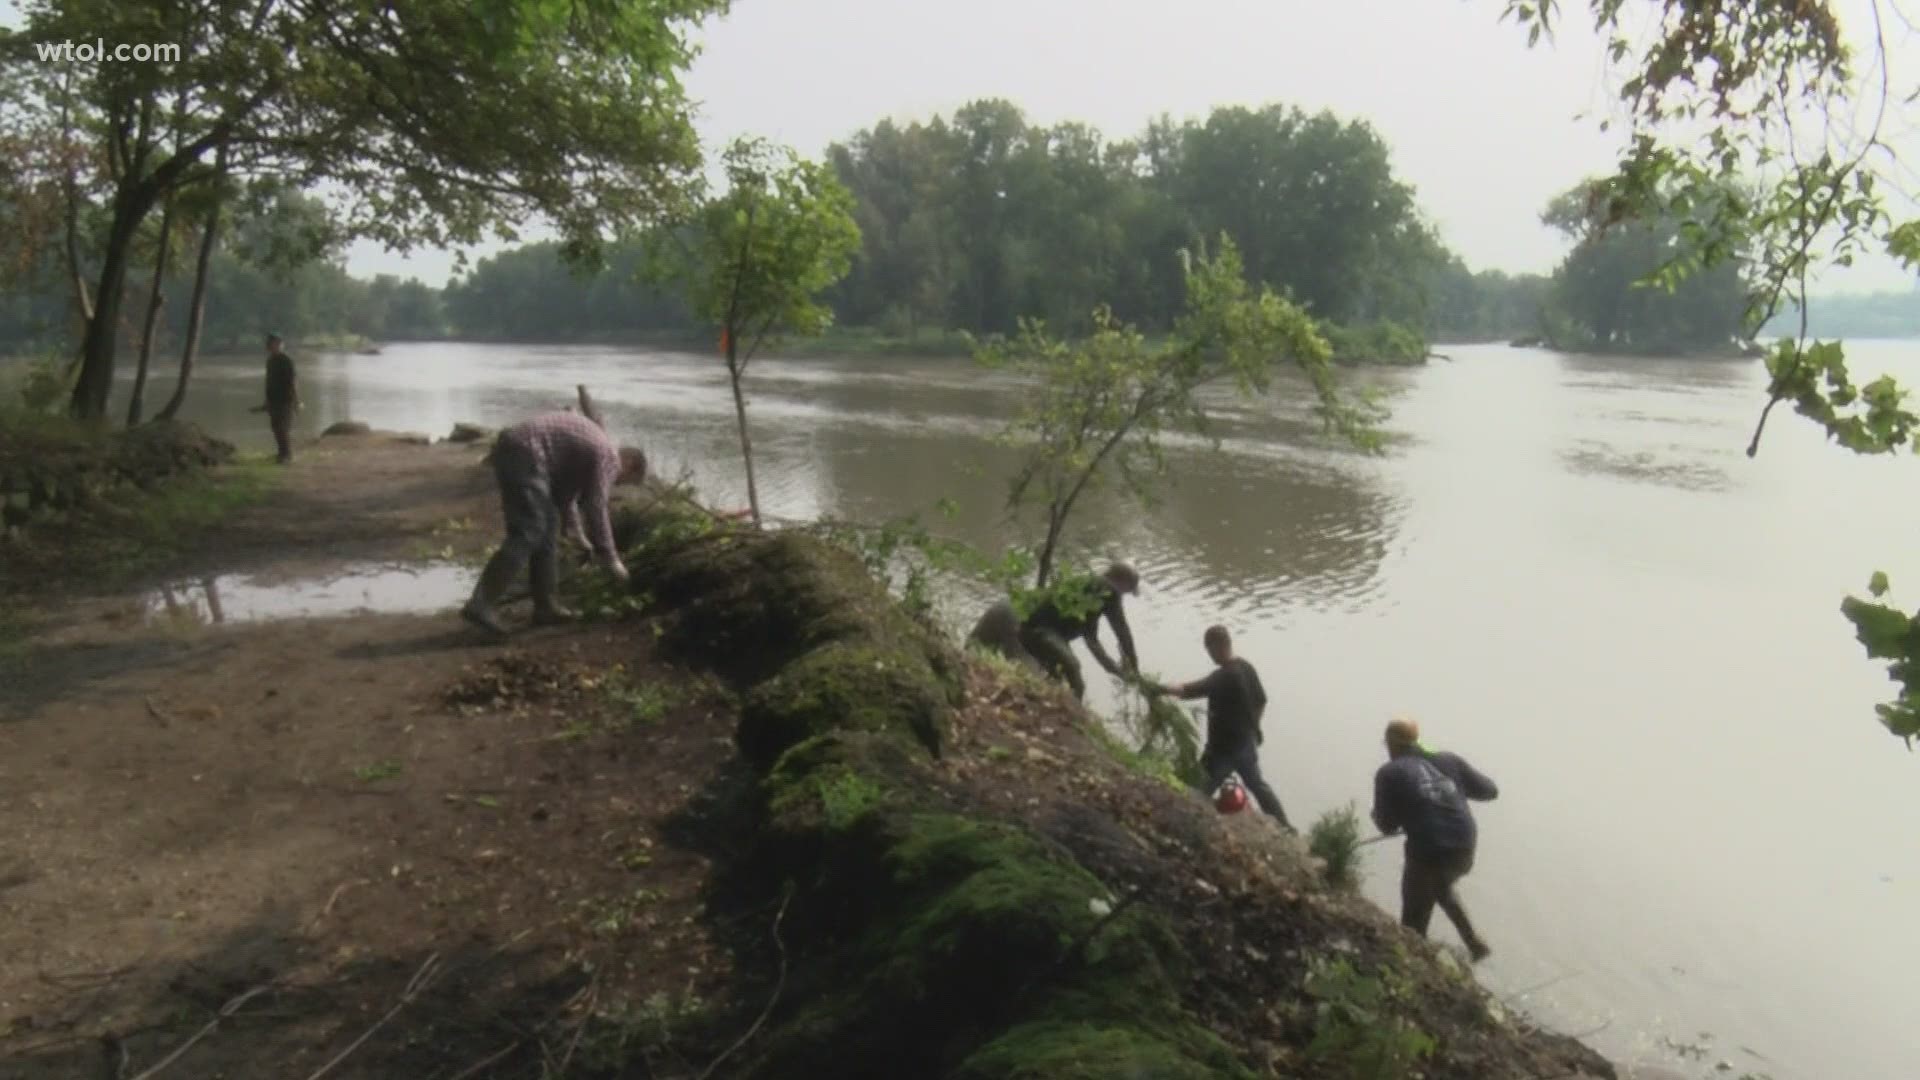 Jonathan Fiscus has spent the last two weekends helping to beatify the shores of the Maumee River in Towpath Park in Maumee.